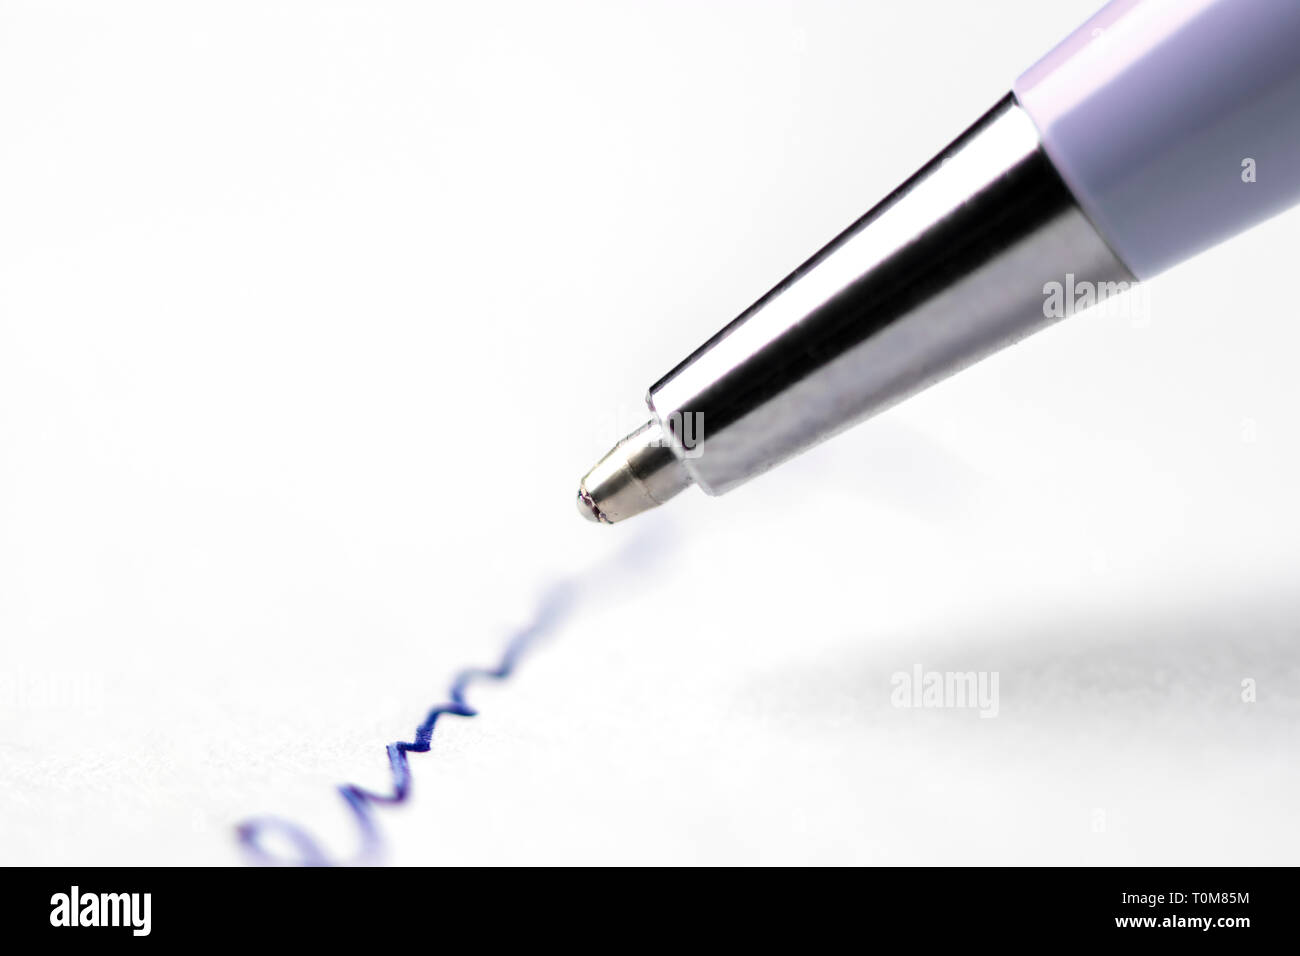 Tip of pen writing on paper Stock Photo